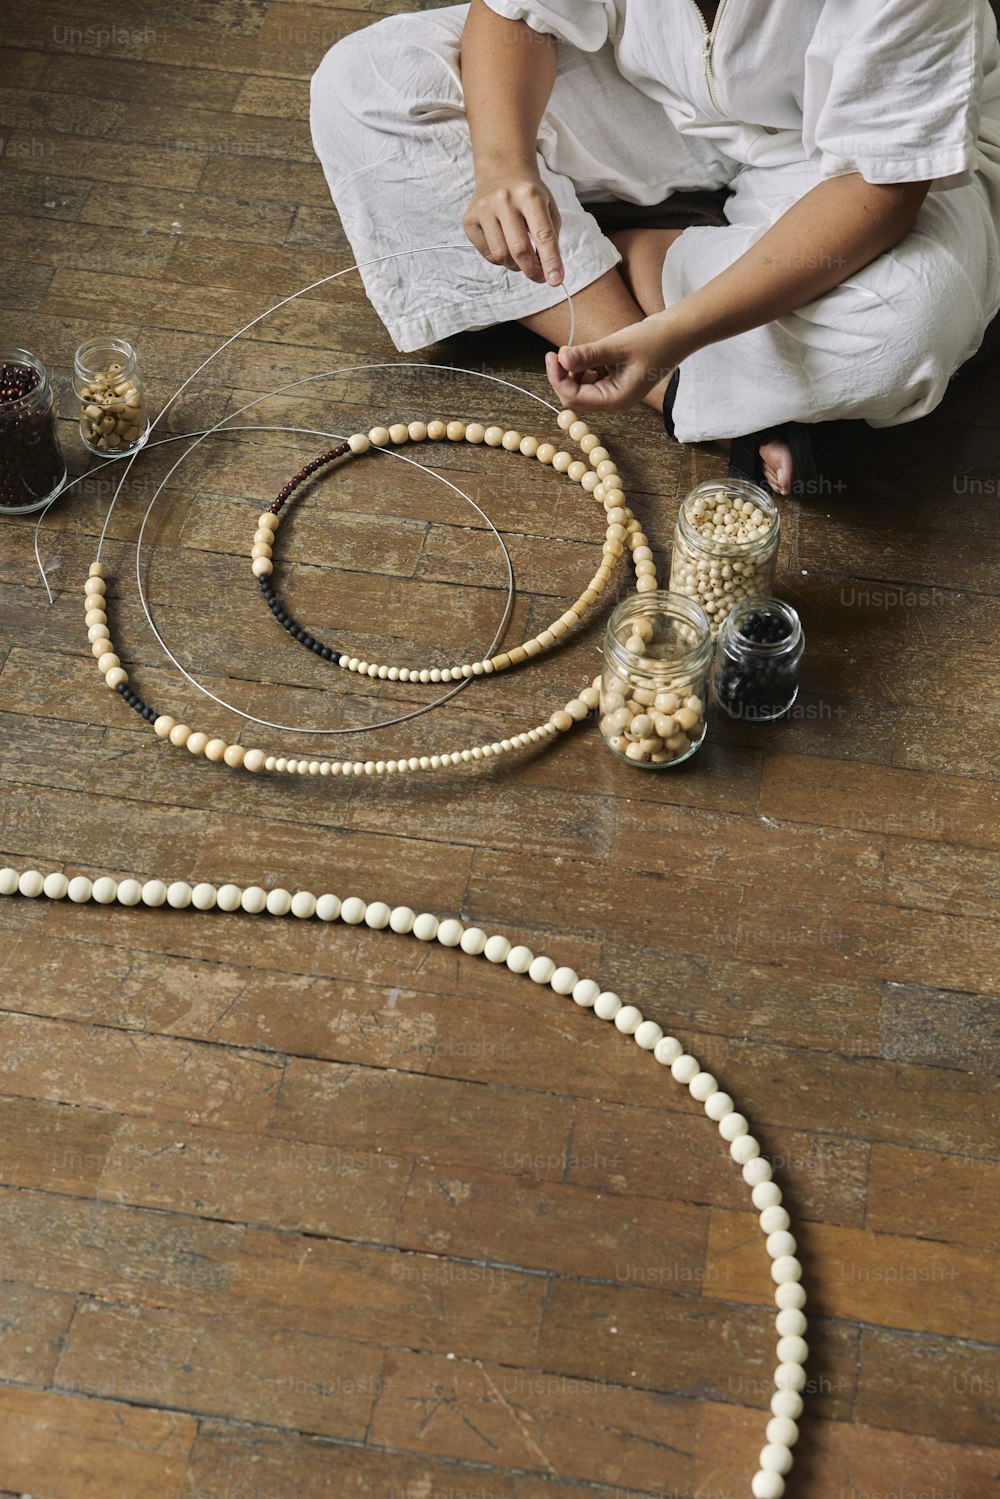 a woman sitting on the floor next to a string of beads